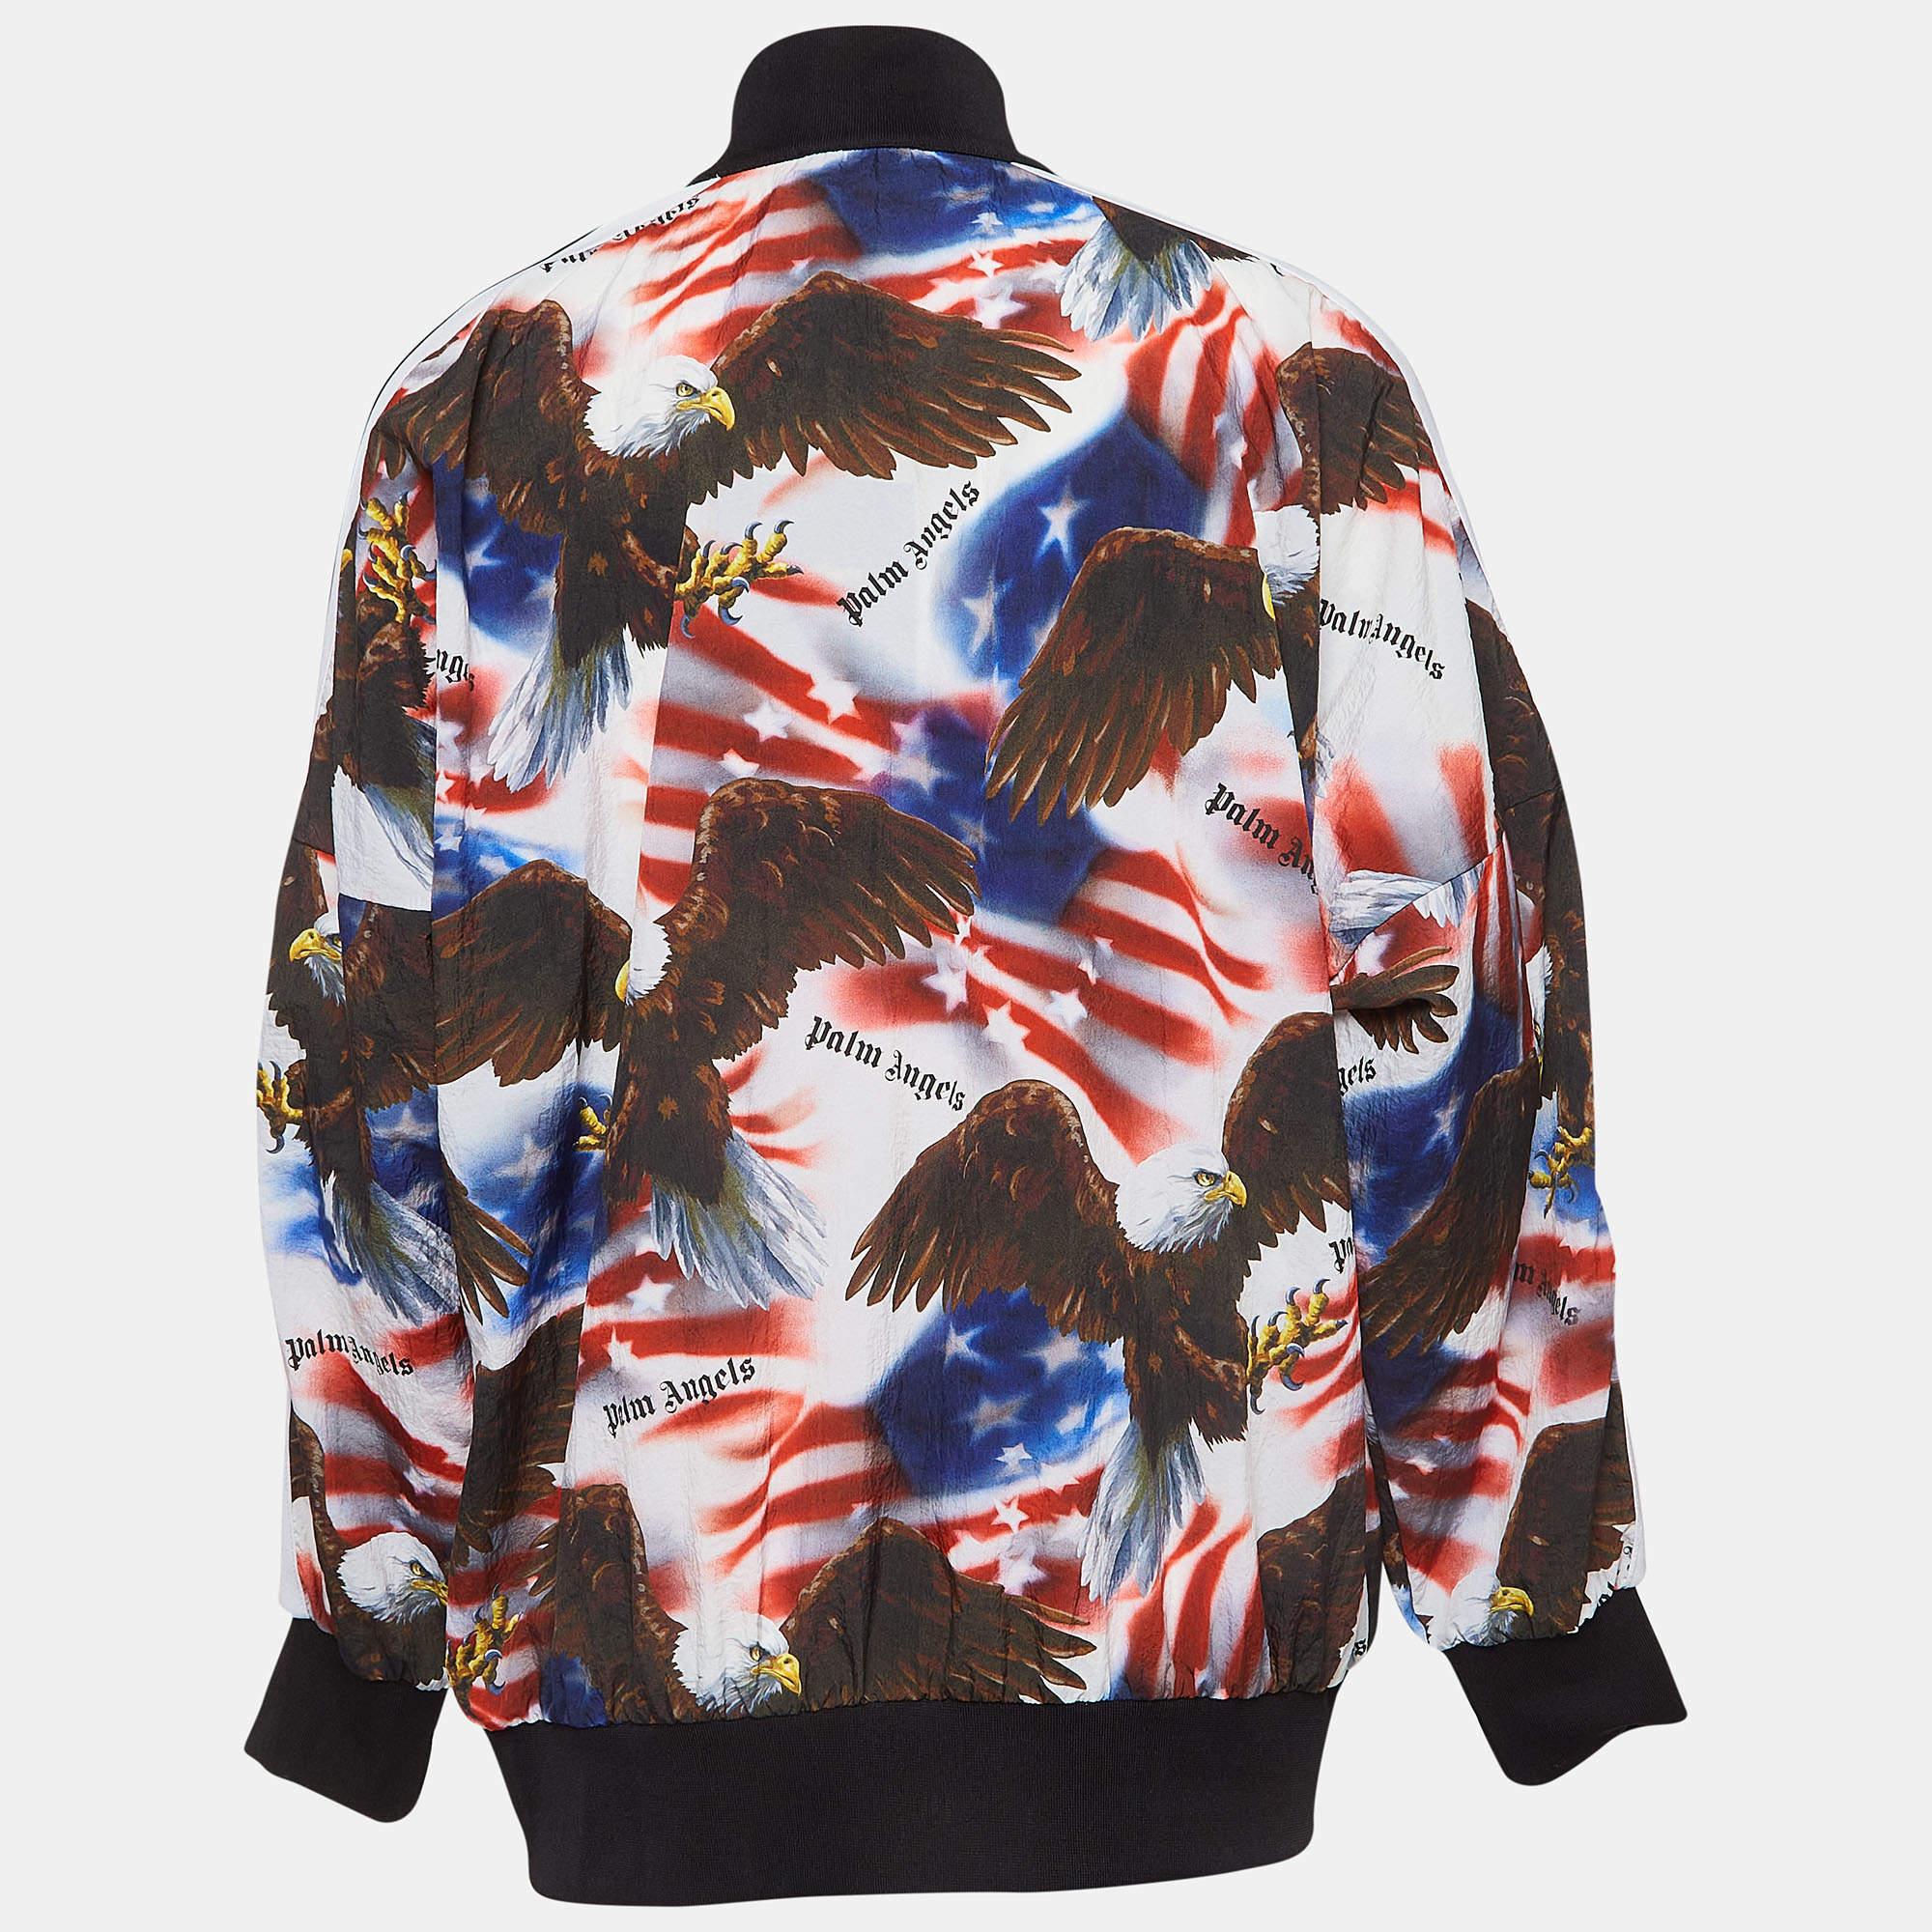 Bold prints and quality come together in this bomber jacket from Palm Angels. This jacket for men is a 'casual style' must-have.

